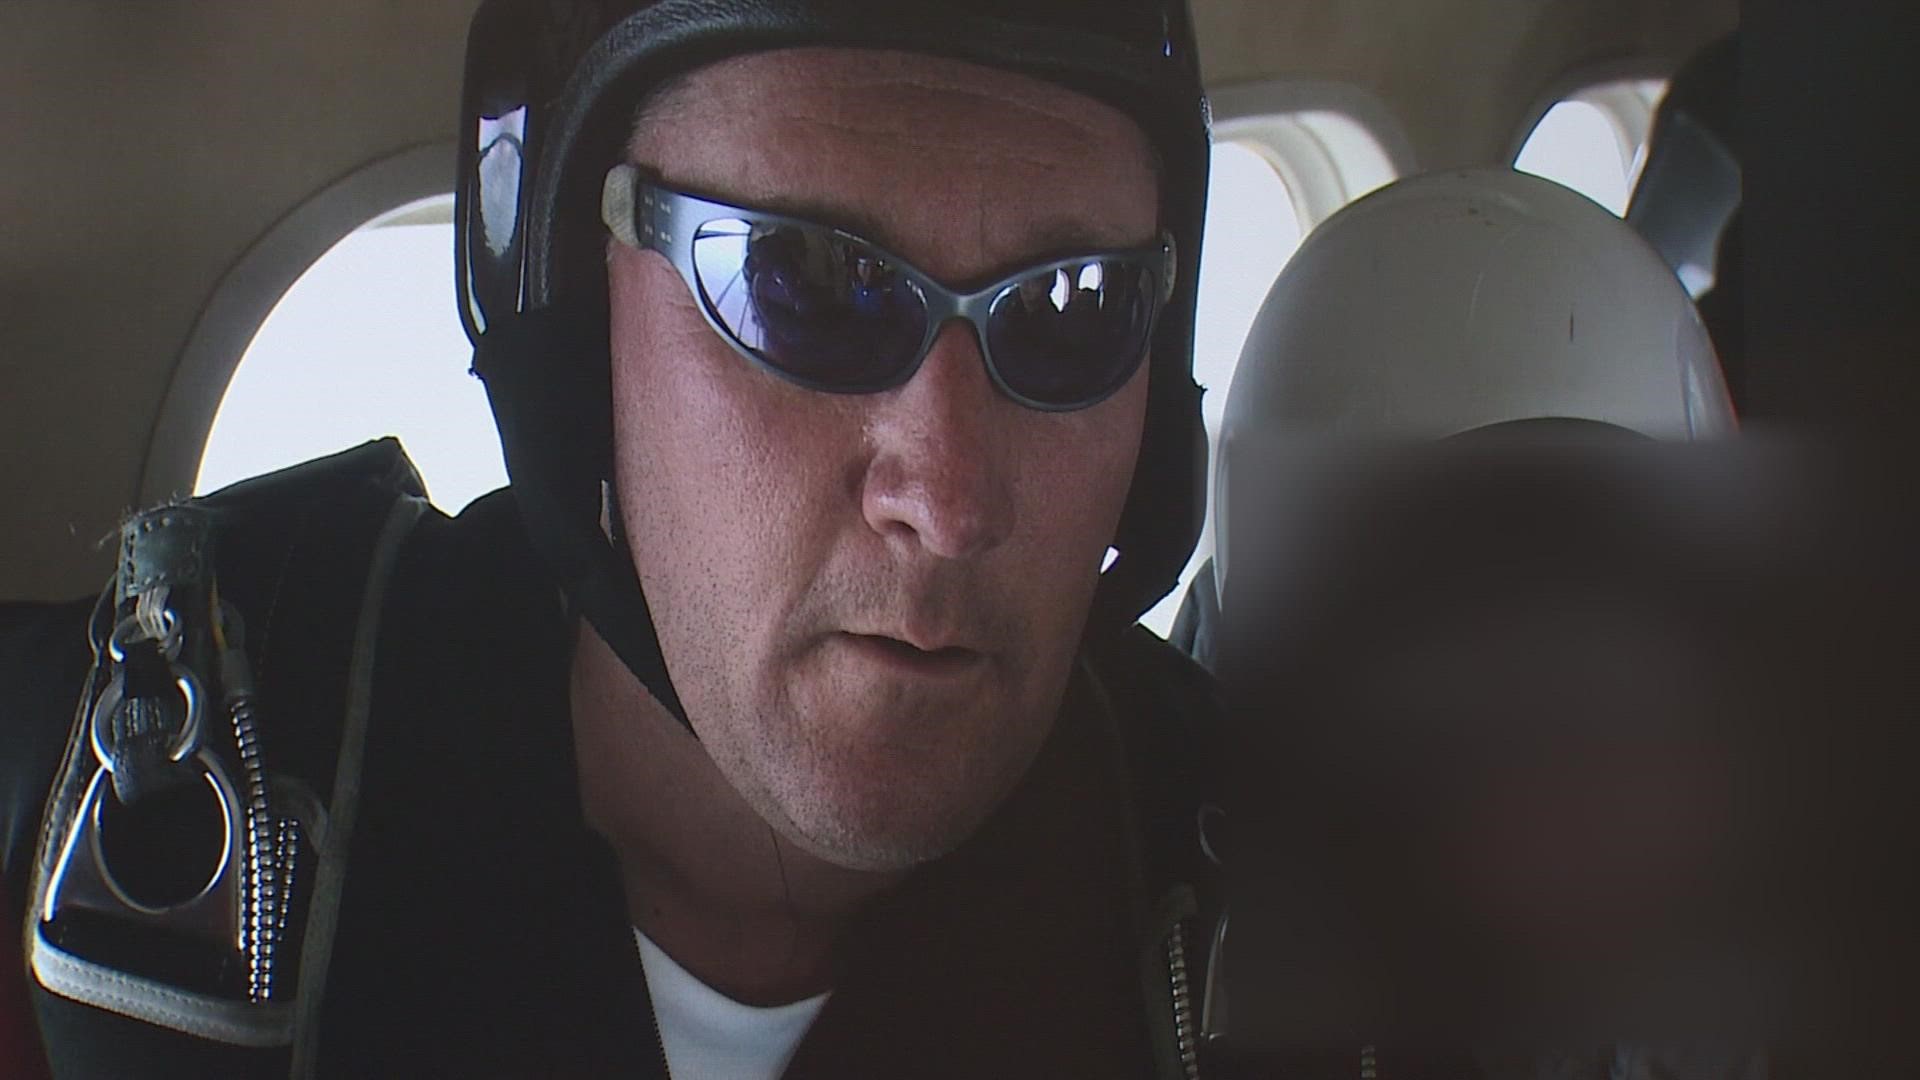 Recent skydiving tragedy brings back old memories for man who survived